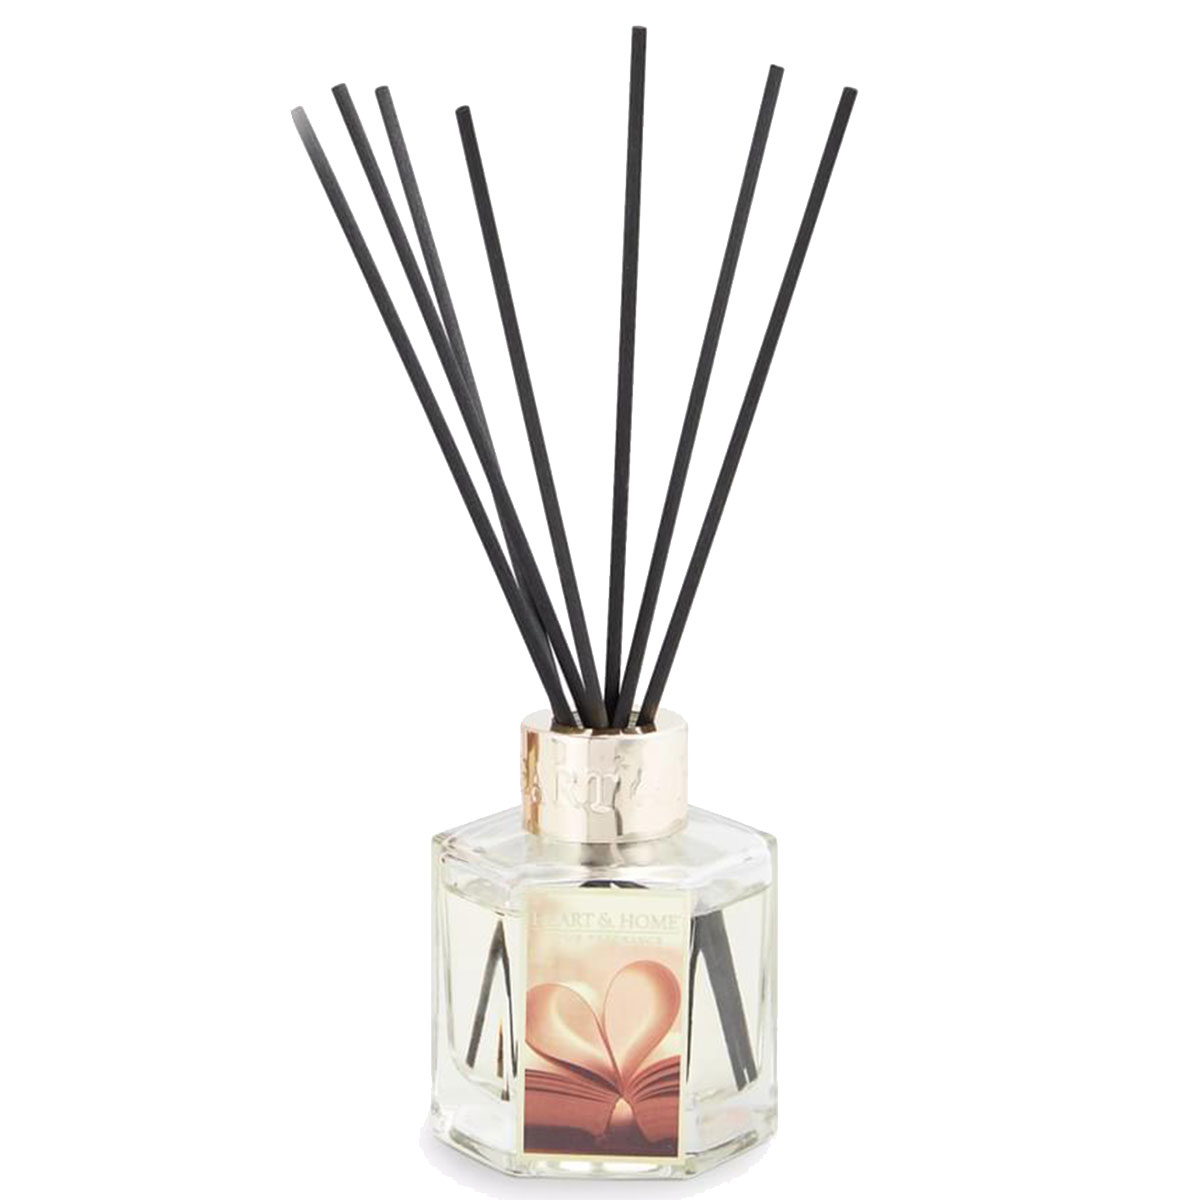 Heart and Home Stick Diffuser - Love Story